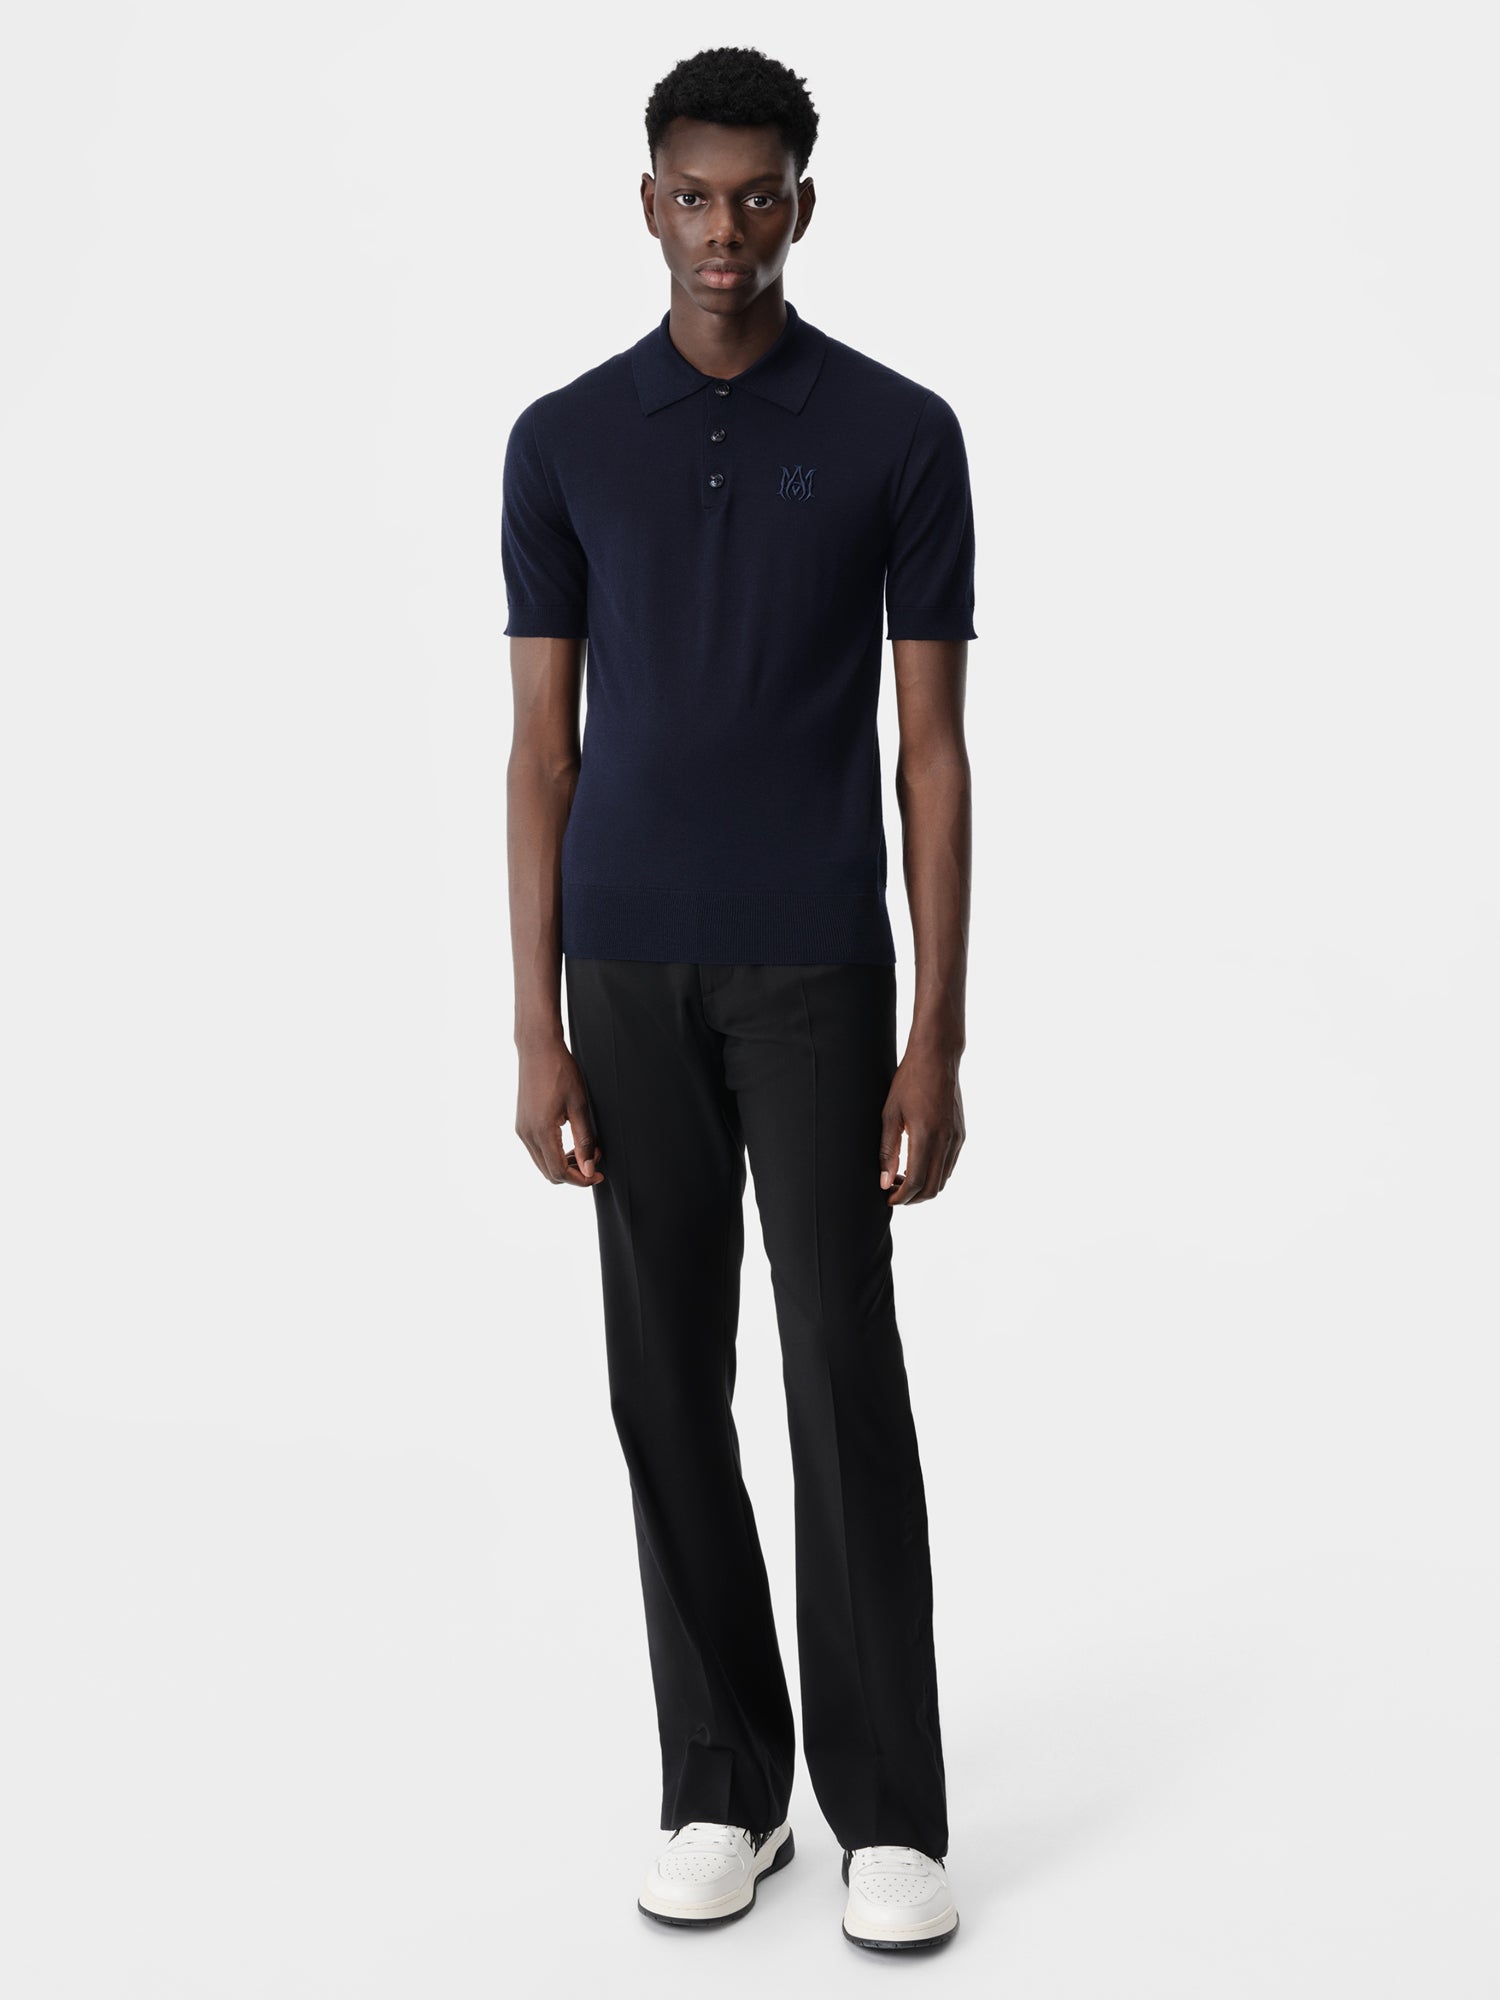 Product MA POLO - Navy featured image